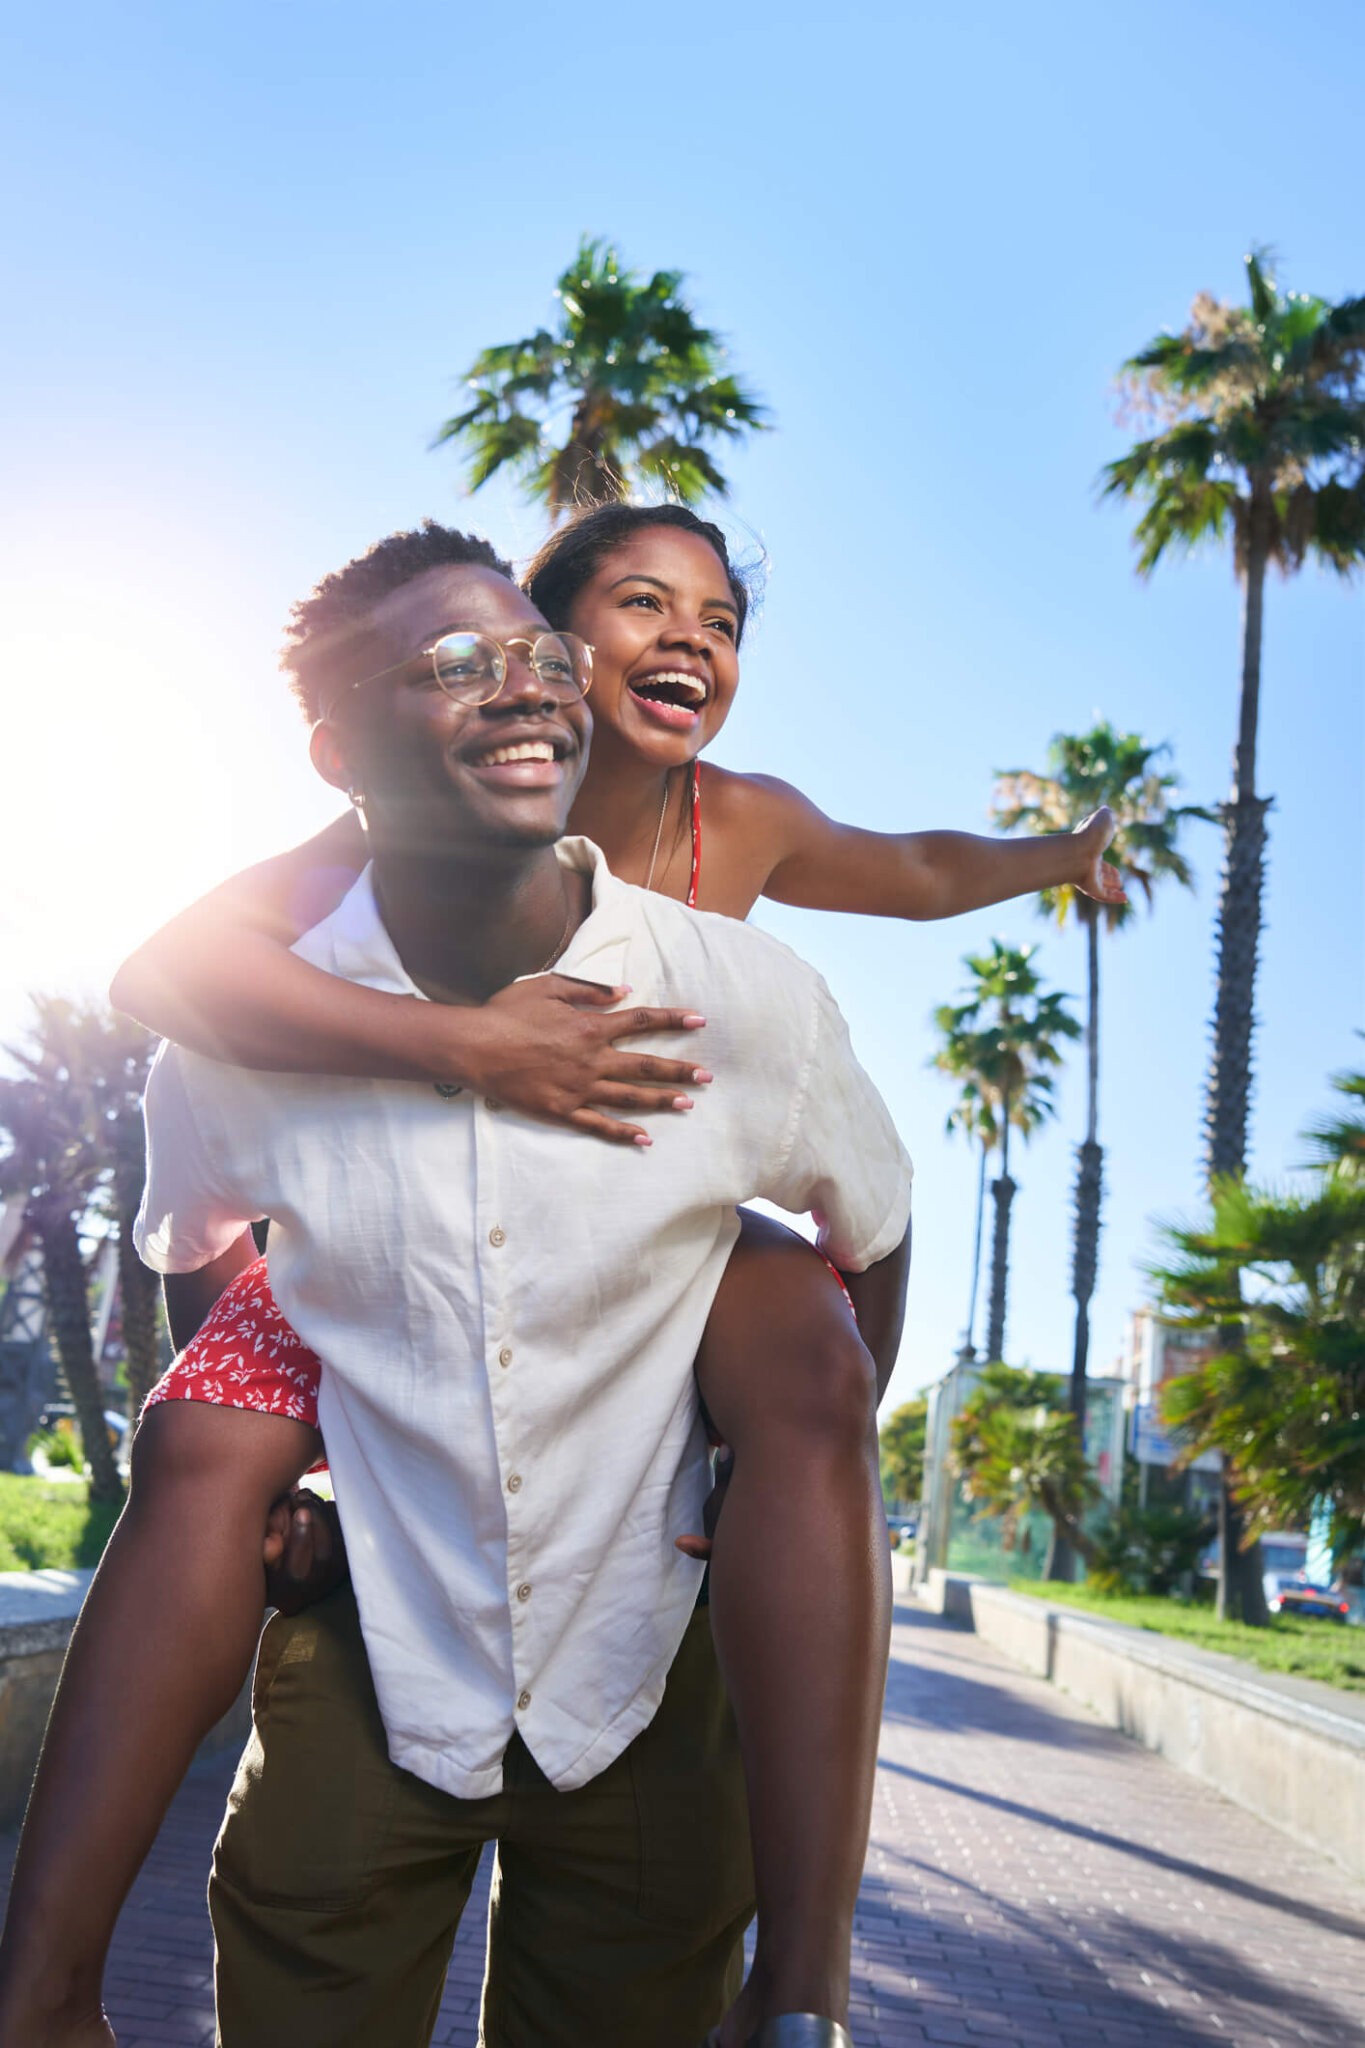 Cheerful portrait of a young mixed race couple on their holidays on an island. African man giving piggyback ride to his Latina girlfriend. Palm trees background . High quality photo